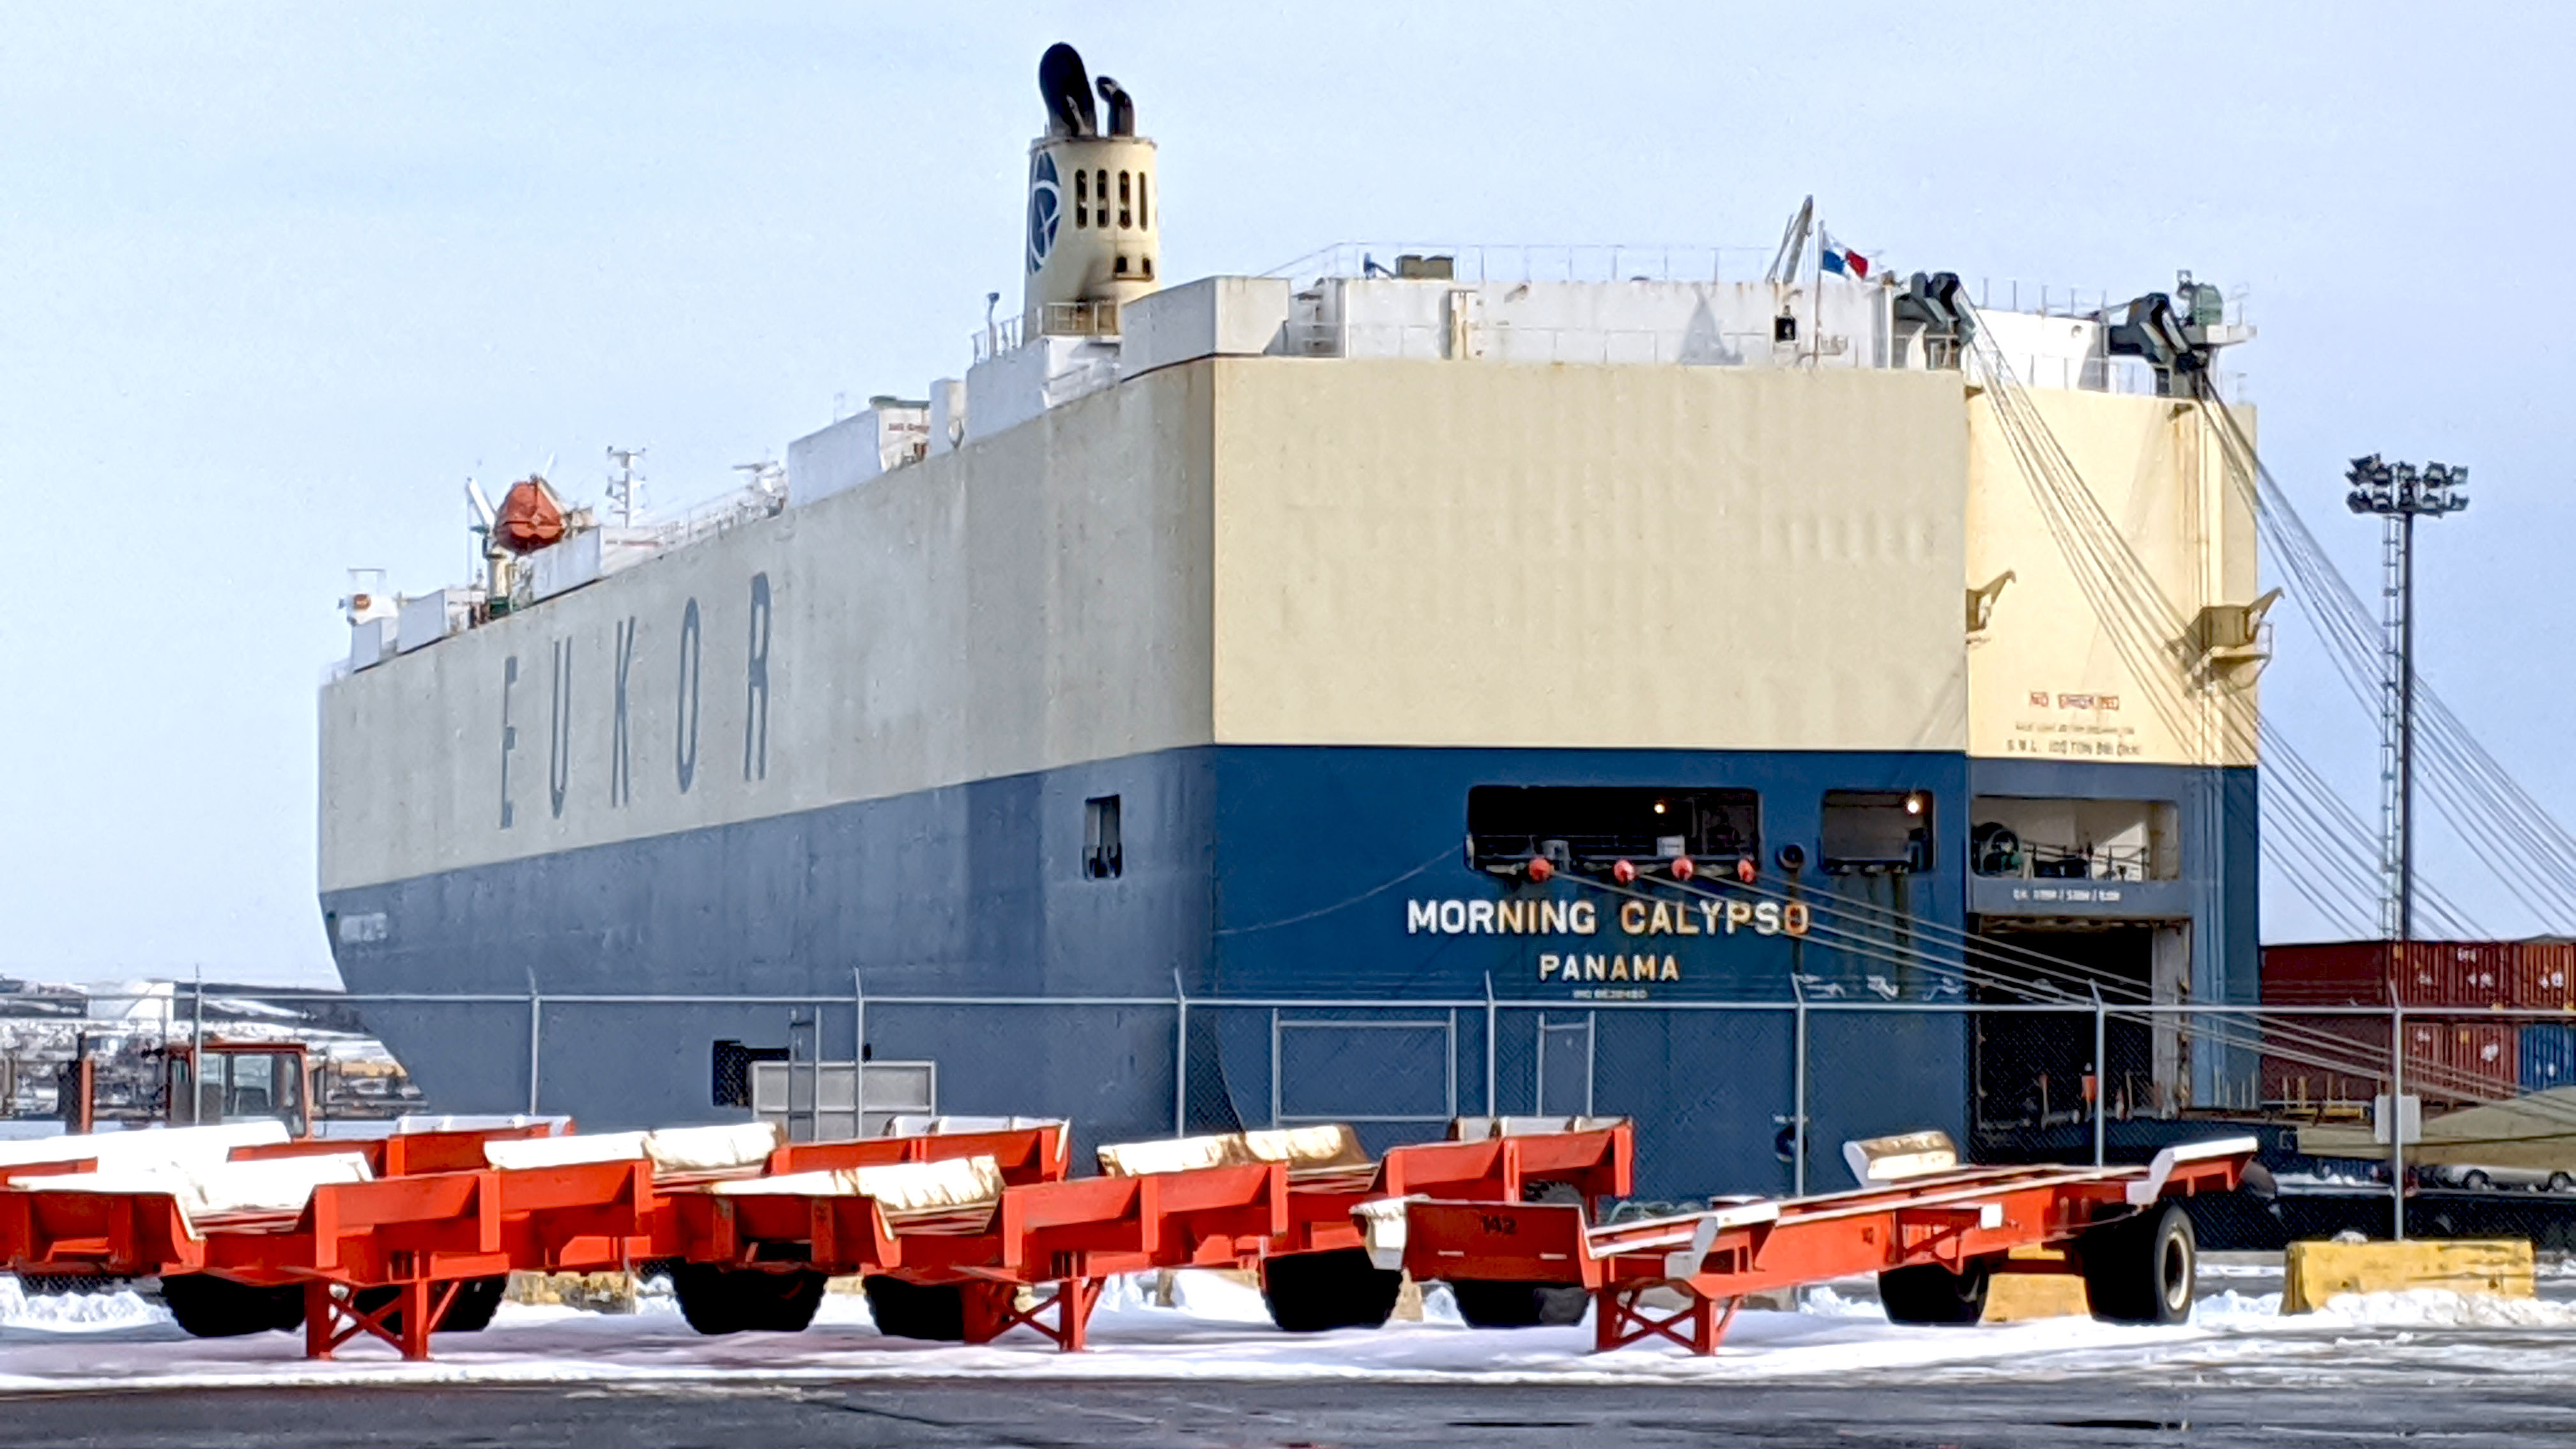 The vehicle carrier ship called Morning Calypso could be one vessel that is monitored by OCIANA. 